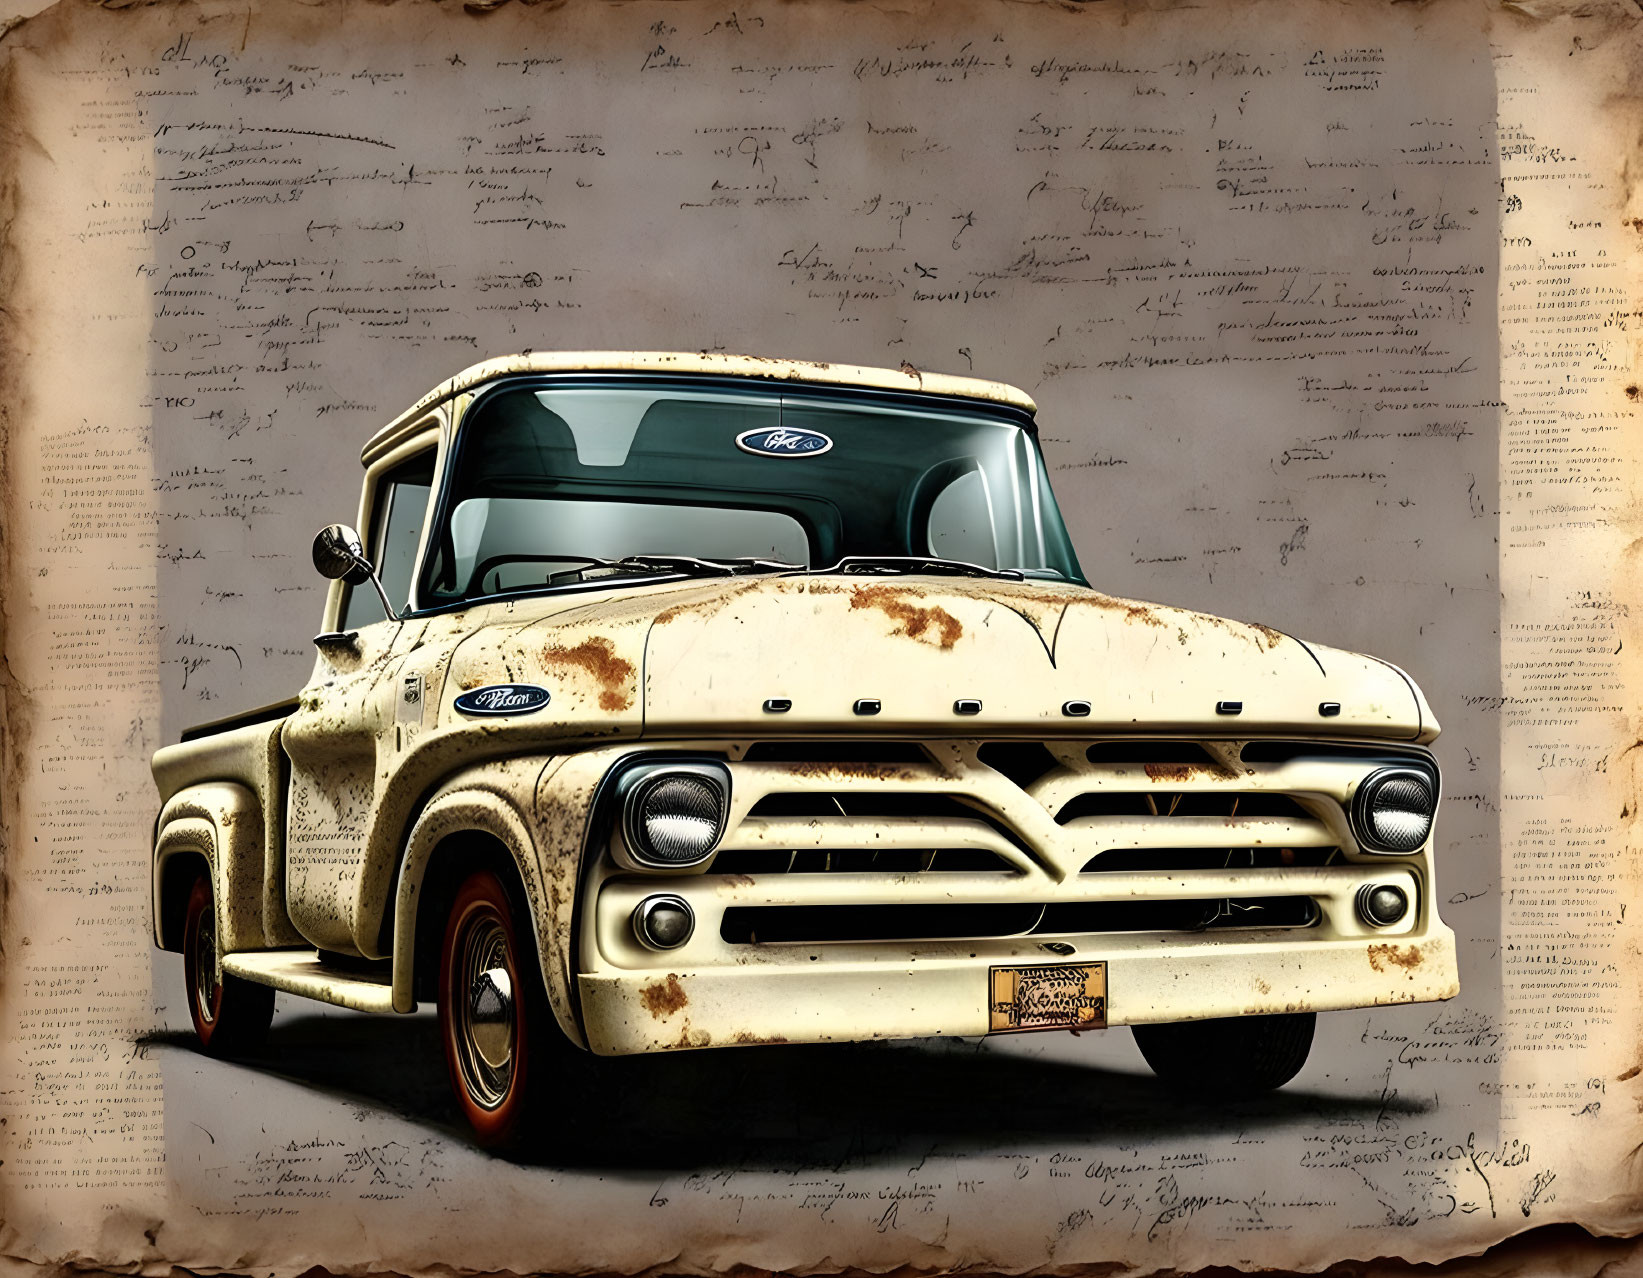 Vintage Ford Pickup Truck on Aged Paper with Illegible Handwriting